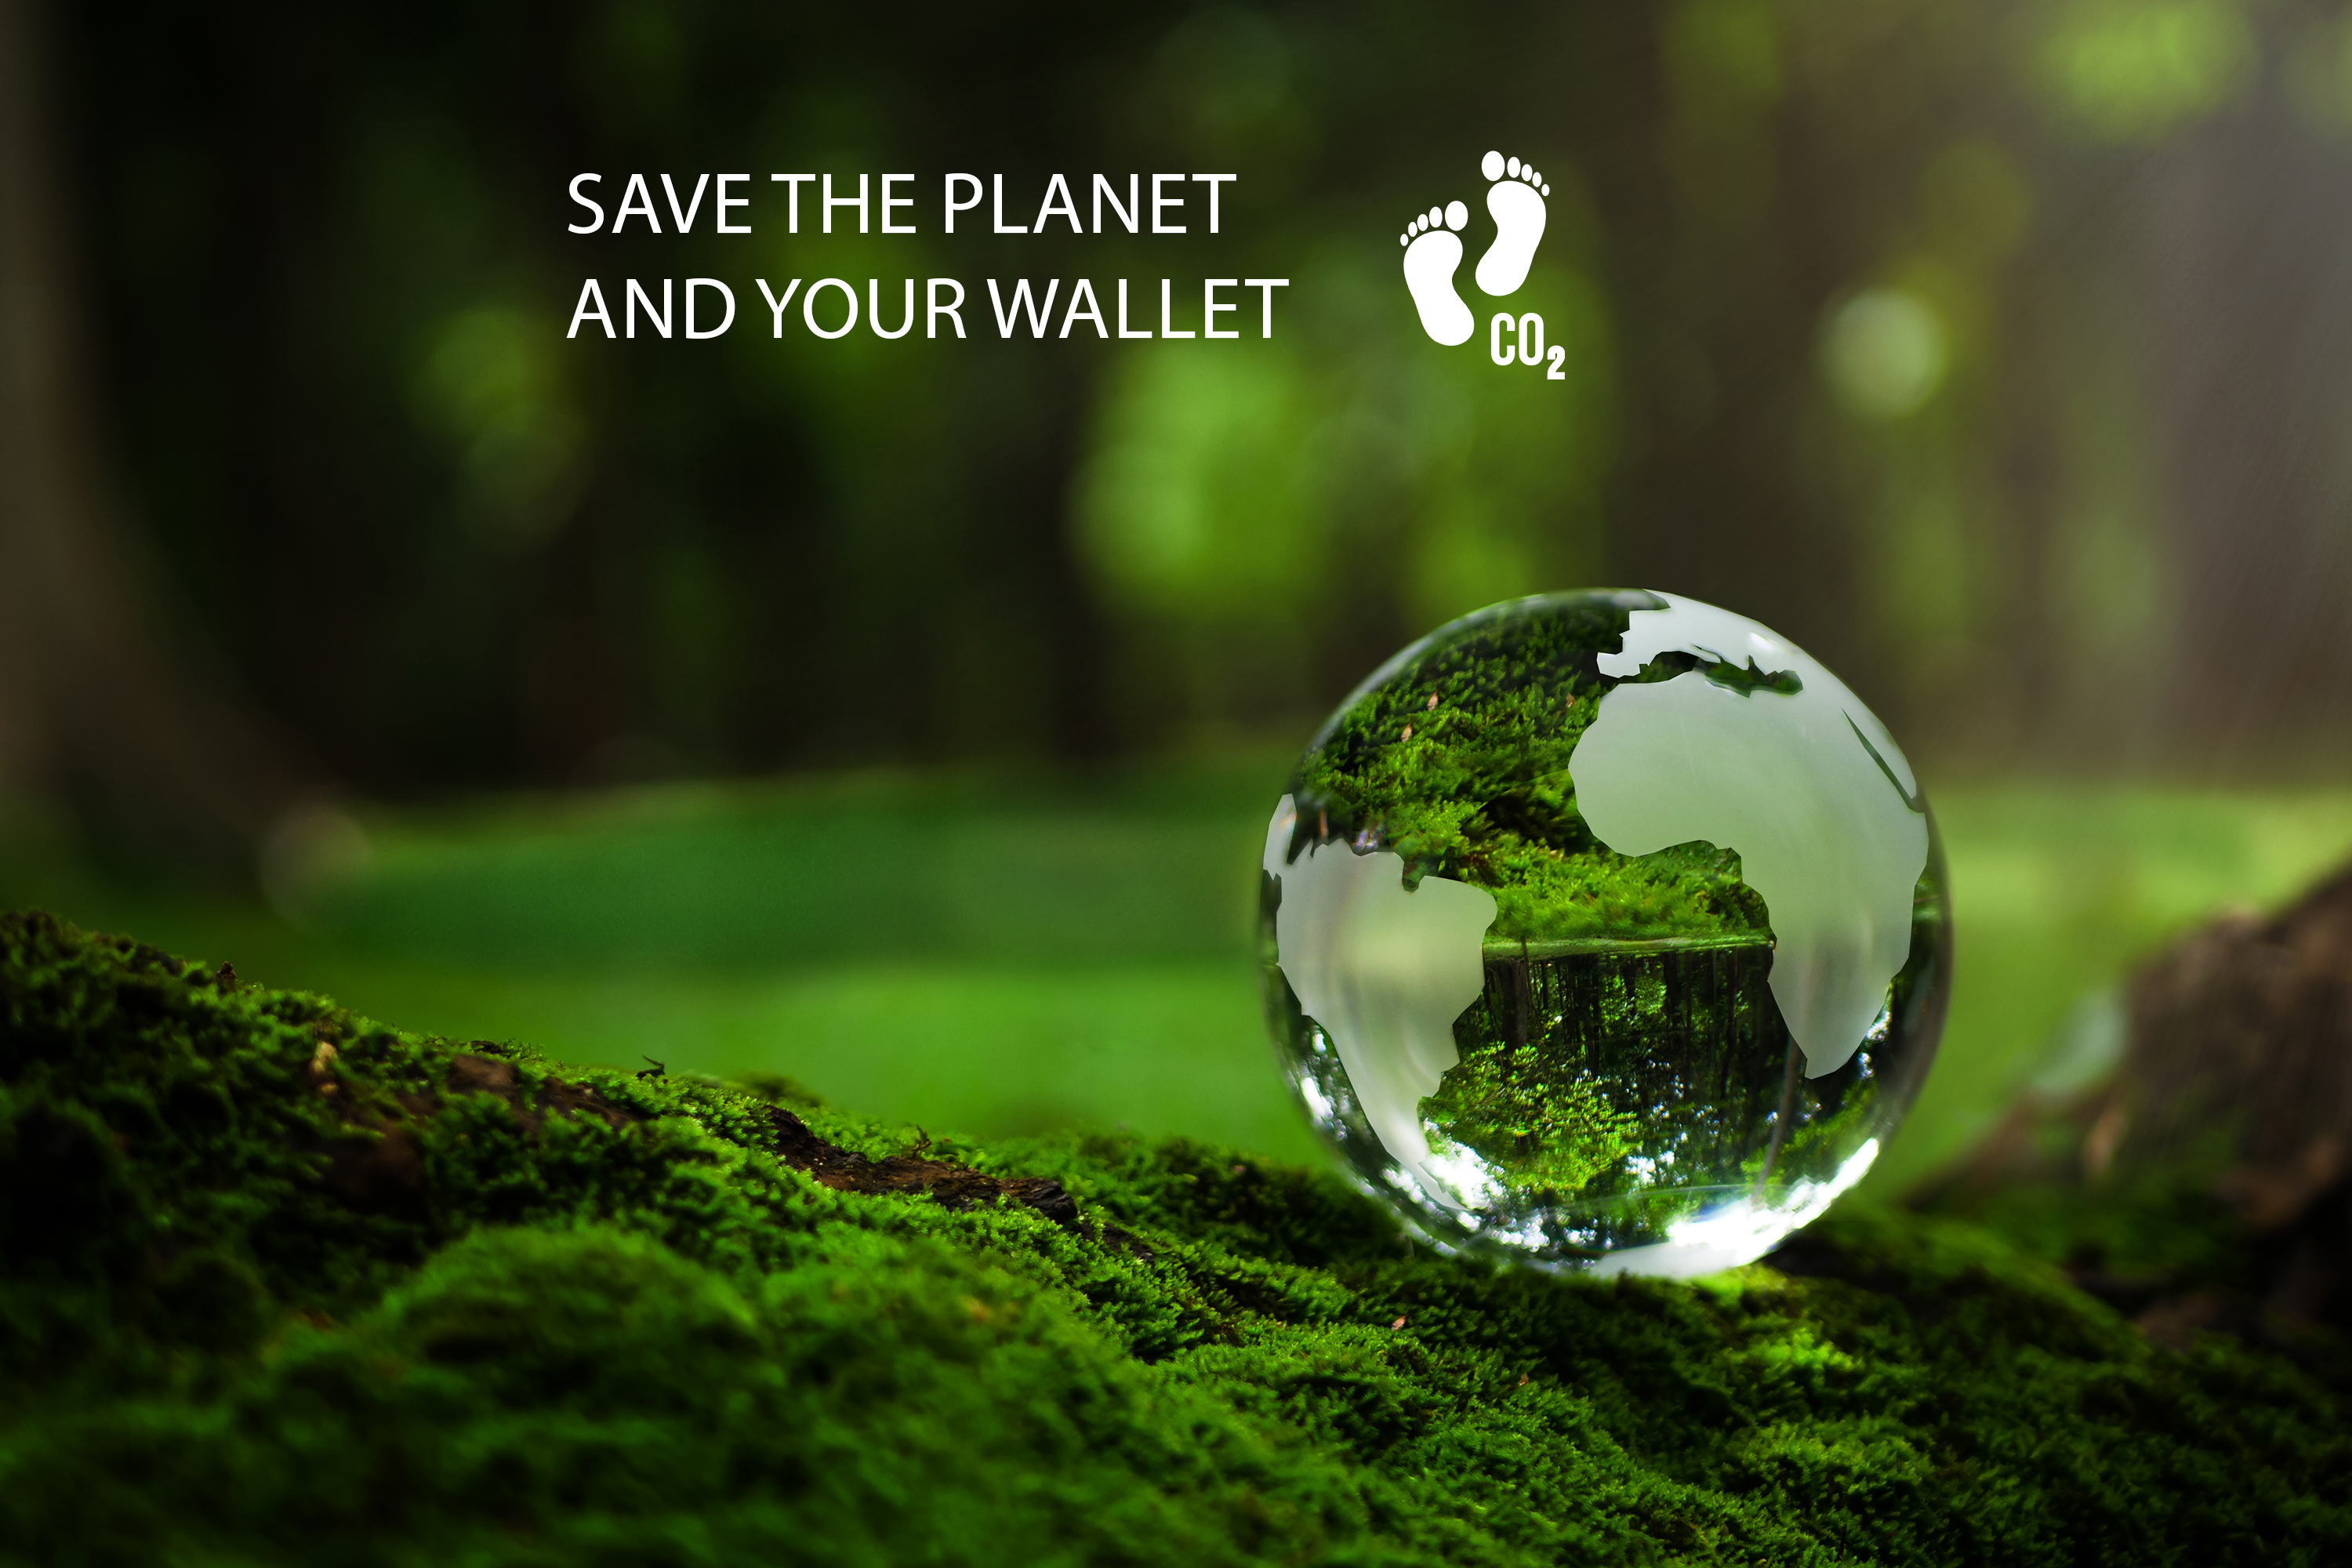 Save the Planet and Your Wallet: Buying a Pre-Owned Dell Server from CXtec Reduces CO2 Emissions by 471kg